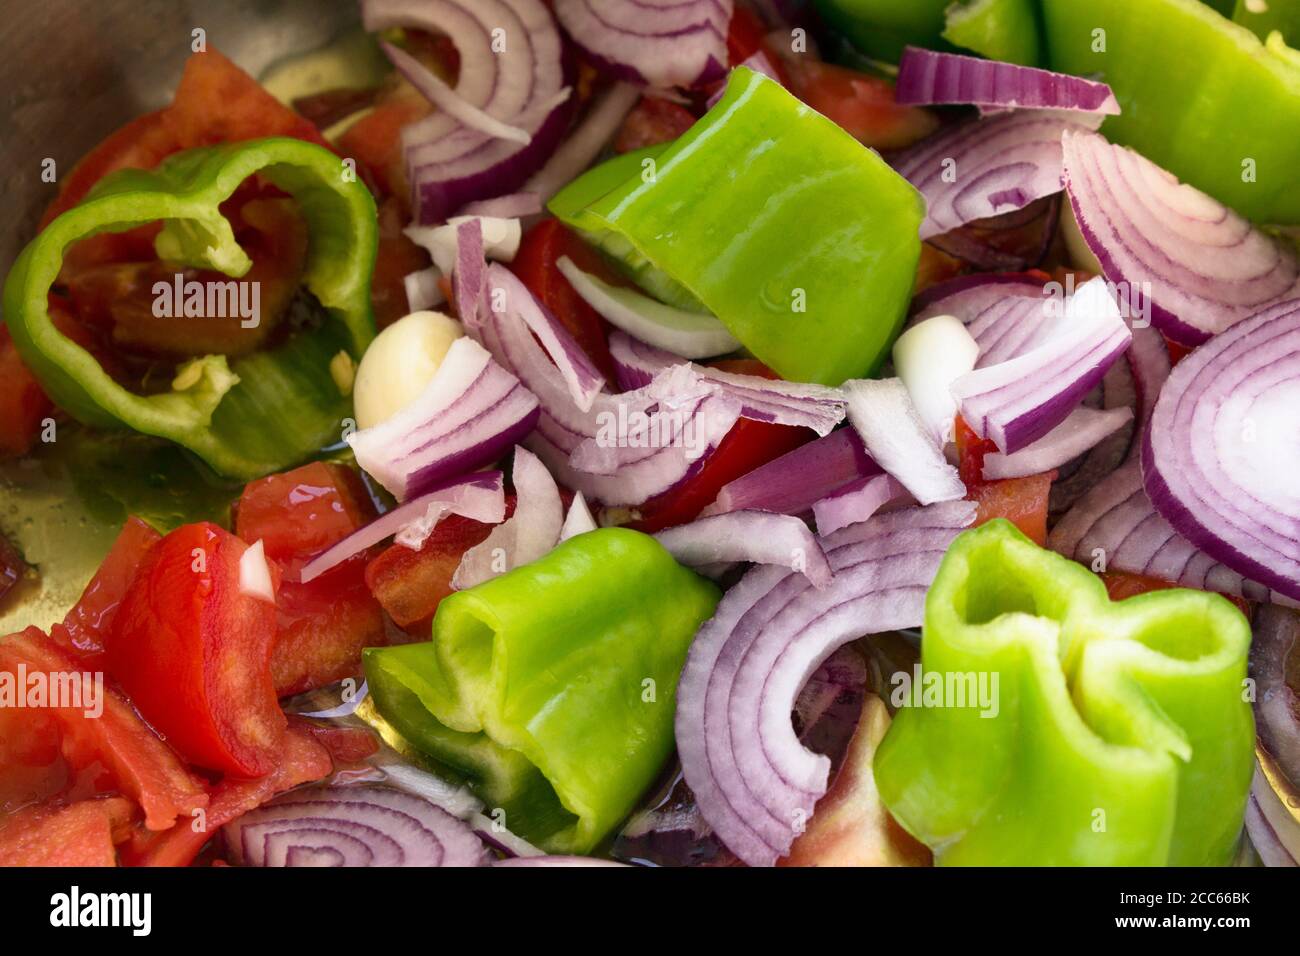 Close up of sliced red and green peppers and red onions with garlic to be cooked with olive oil. Stock Photo